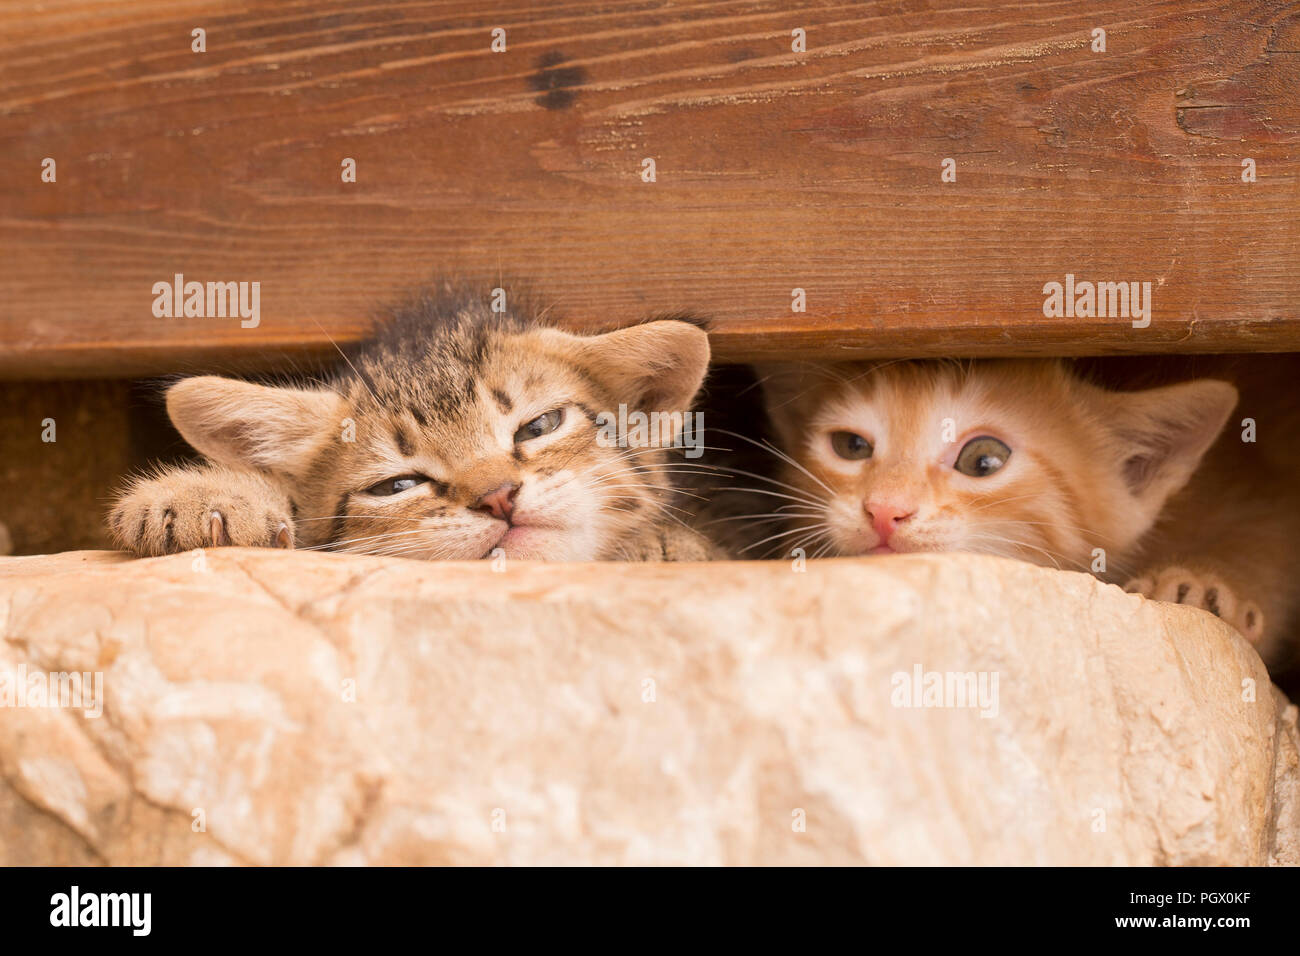 Two kittens in hiding under a wooden plank Stock Photo